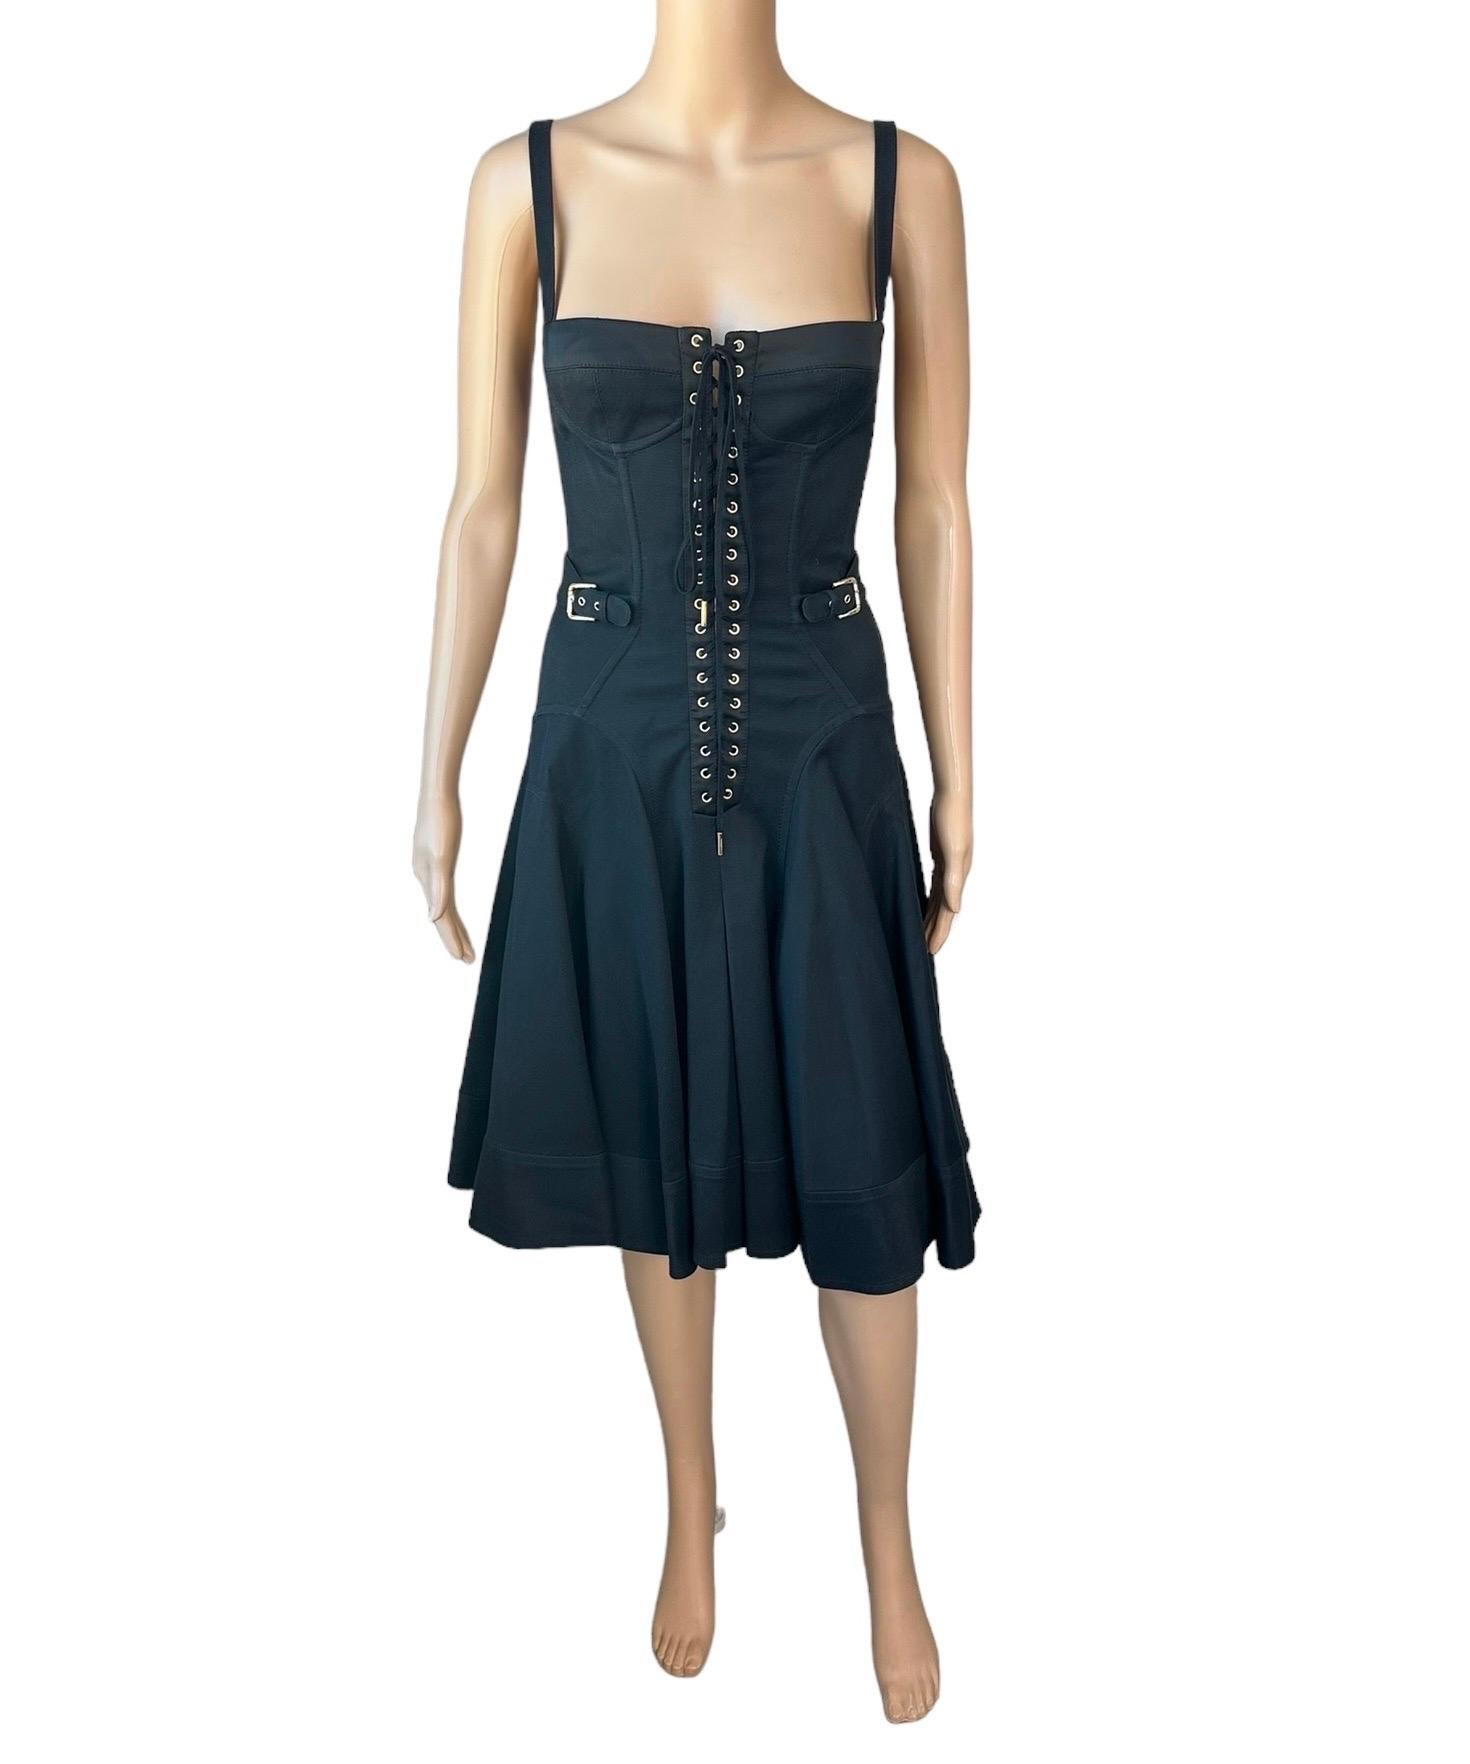 Dolce & Gabbana S/S 2007 Unworn Corset Lace-Up Bustier Black Dress In New Condition For Sale In Naples, FL